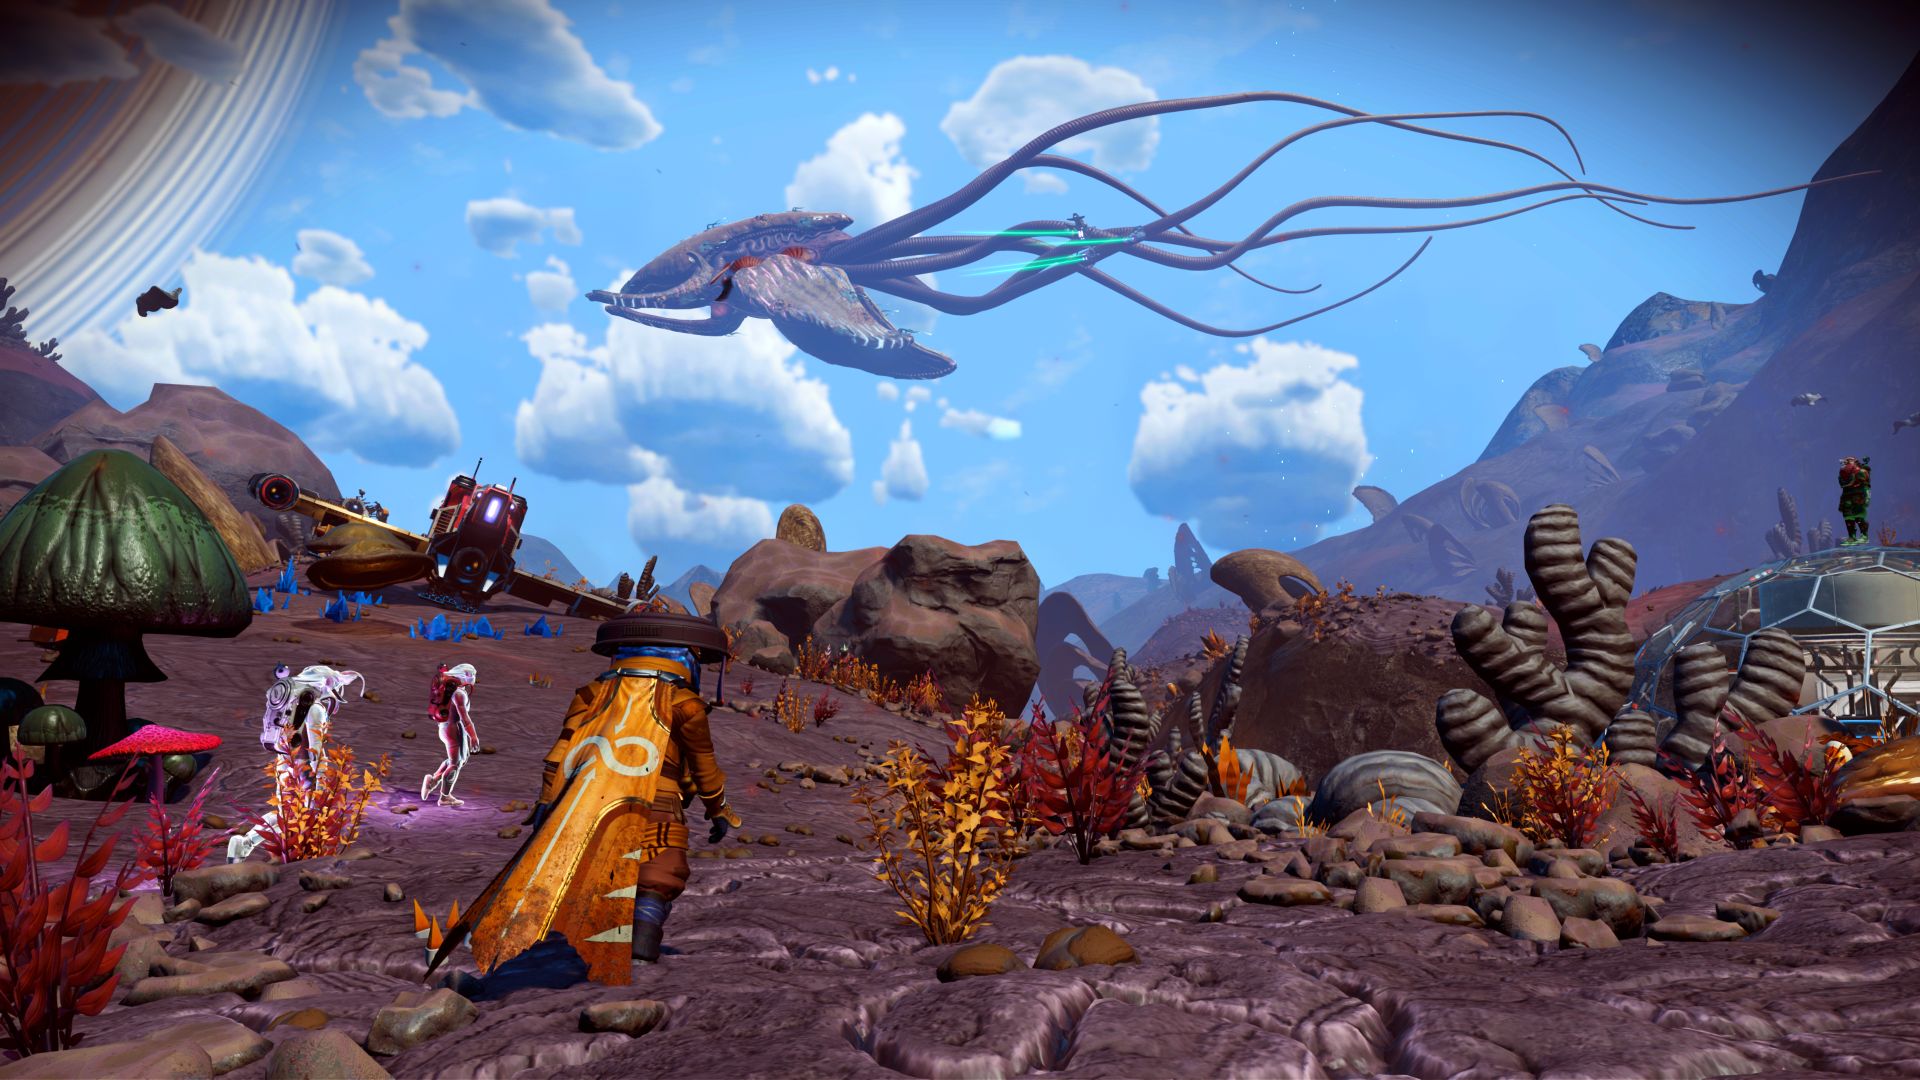 Video For No Man’s Sky: Expedition 7 – Leviathan is Available Now